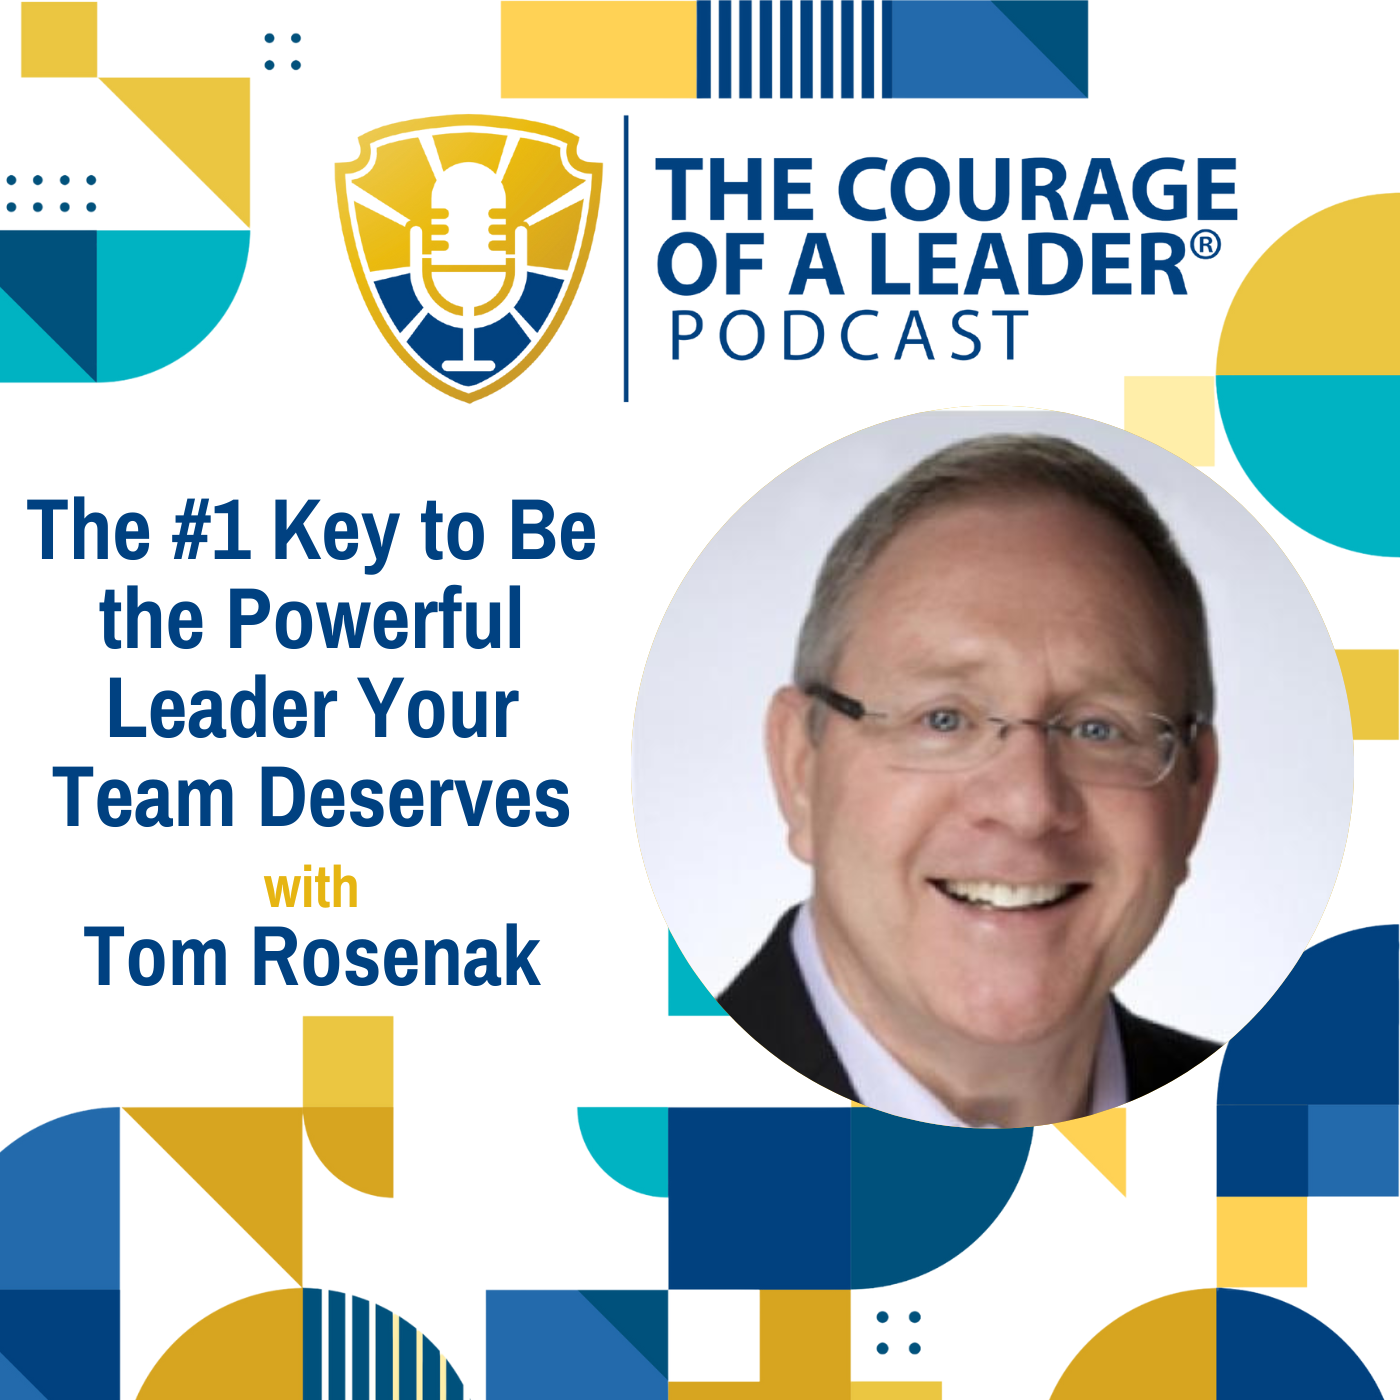 The #1 Key to Be the Powerful Leader Your Team Deserves with Tom Rosenak